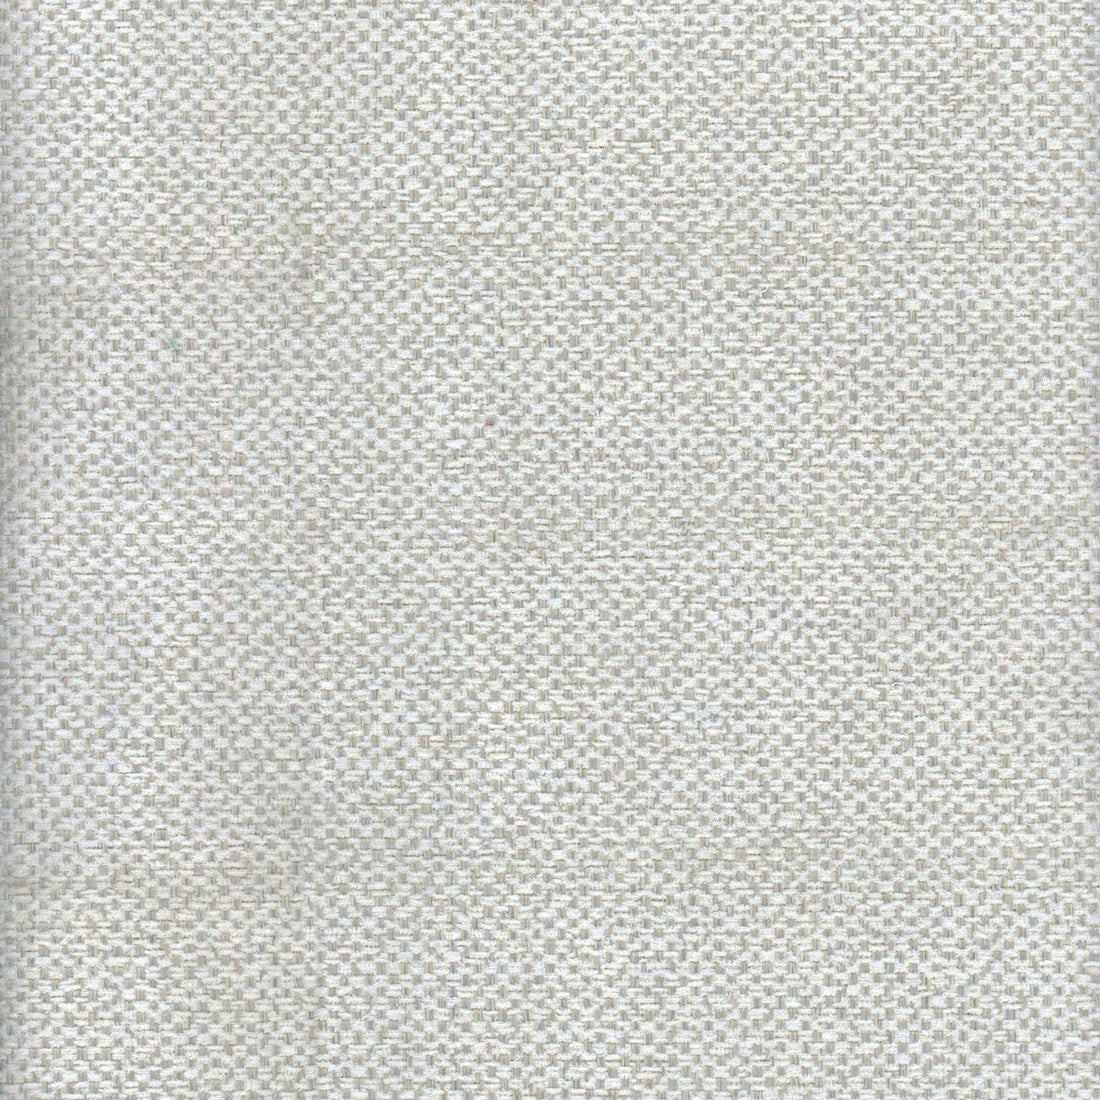 Yosemite fabric in chalk color - pattern AM100332.101.0 - by Kravet Couture in the Andrew Martin Canyon collection